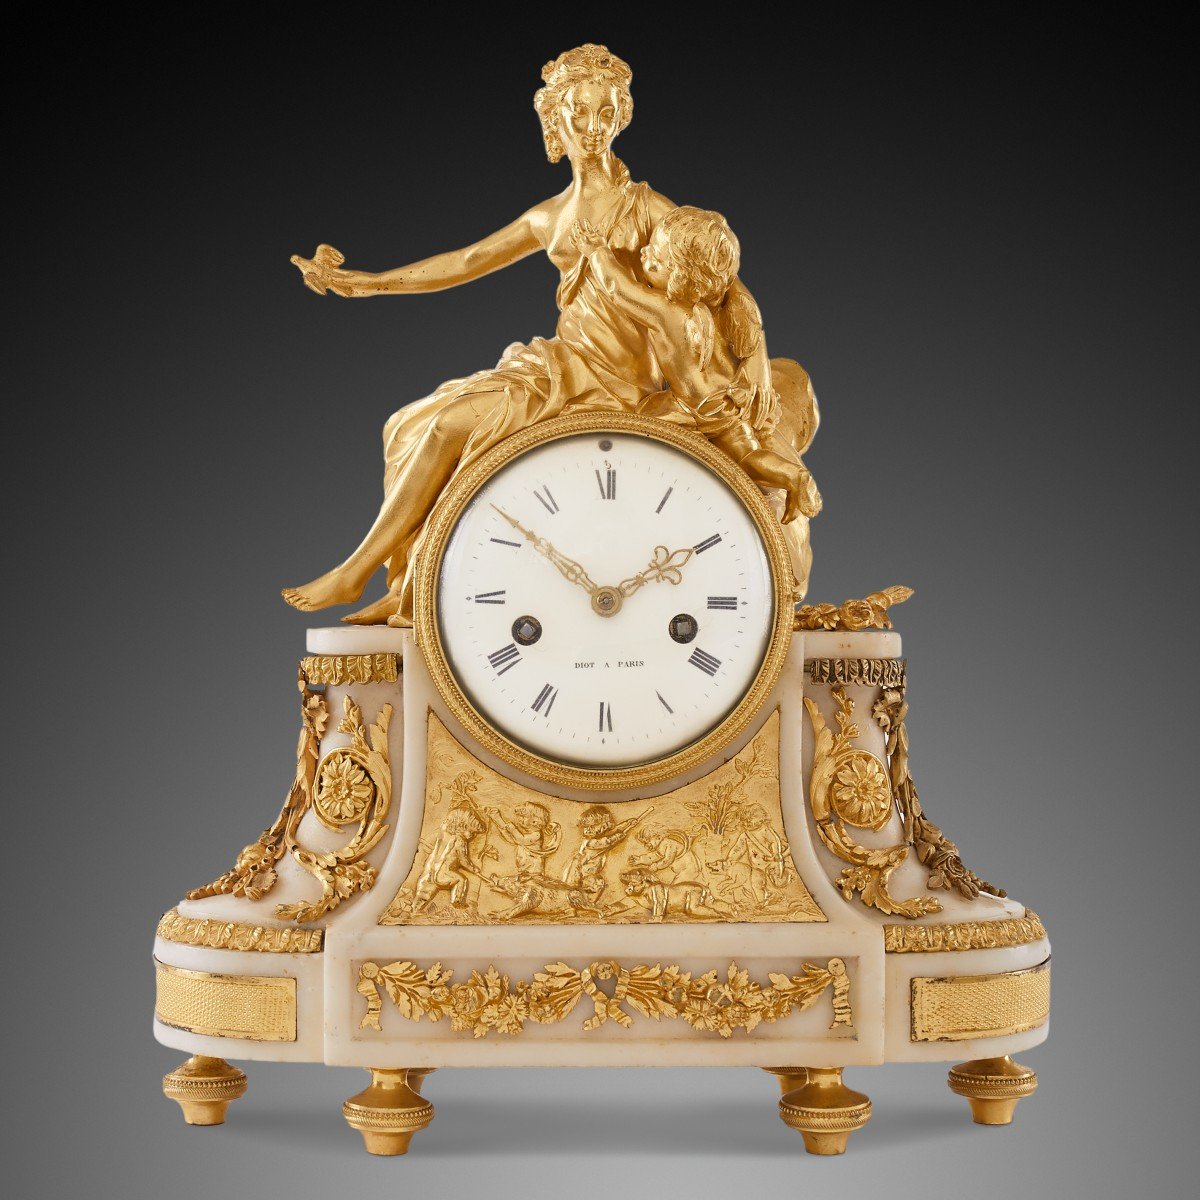 18th Century Mantel Clock Louis XV Period By Diot In Paris.